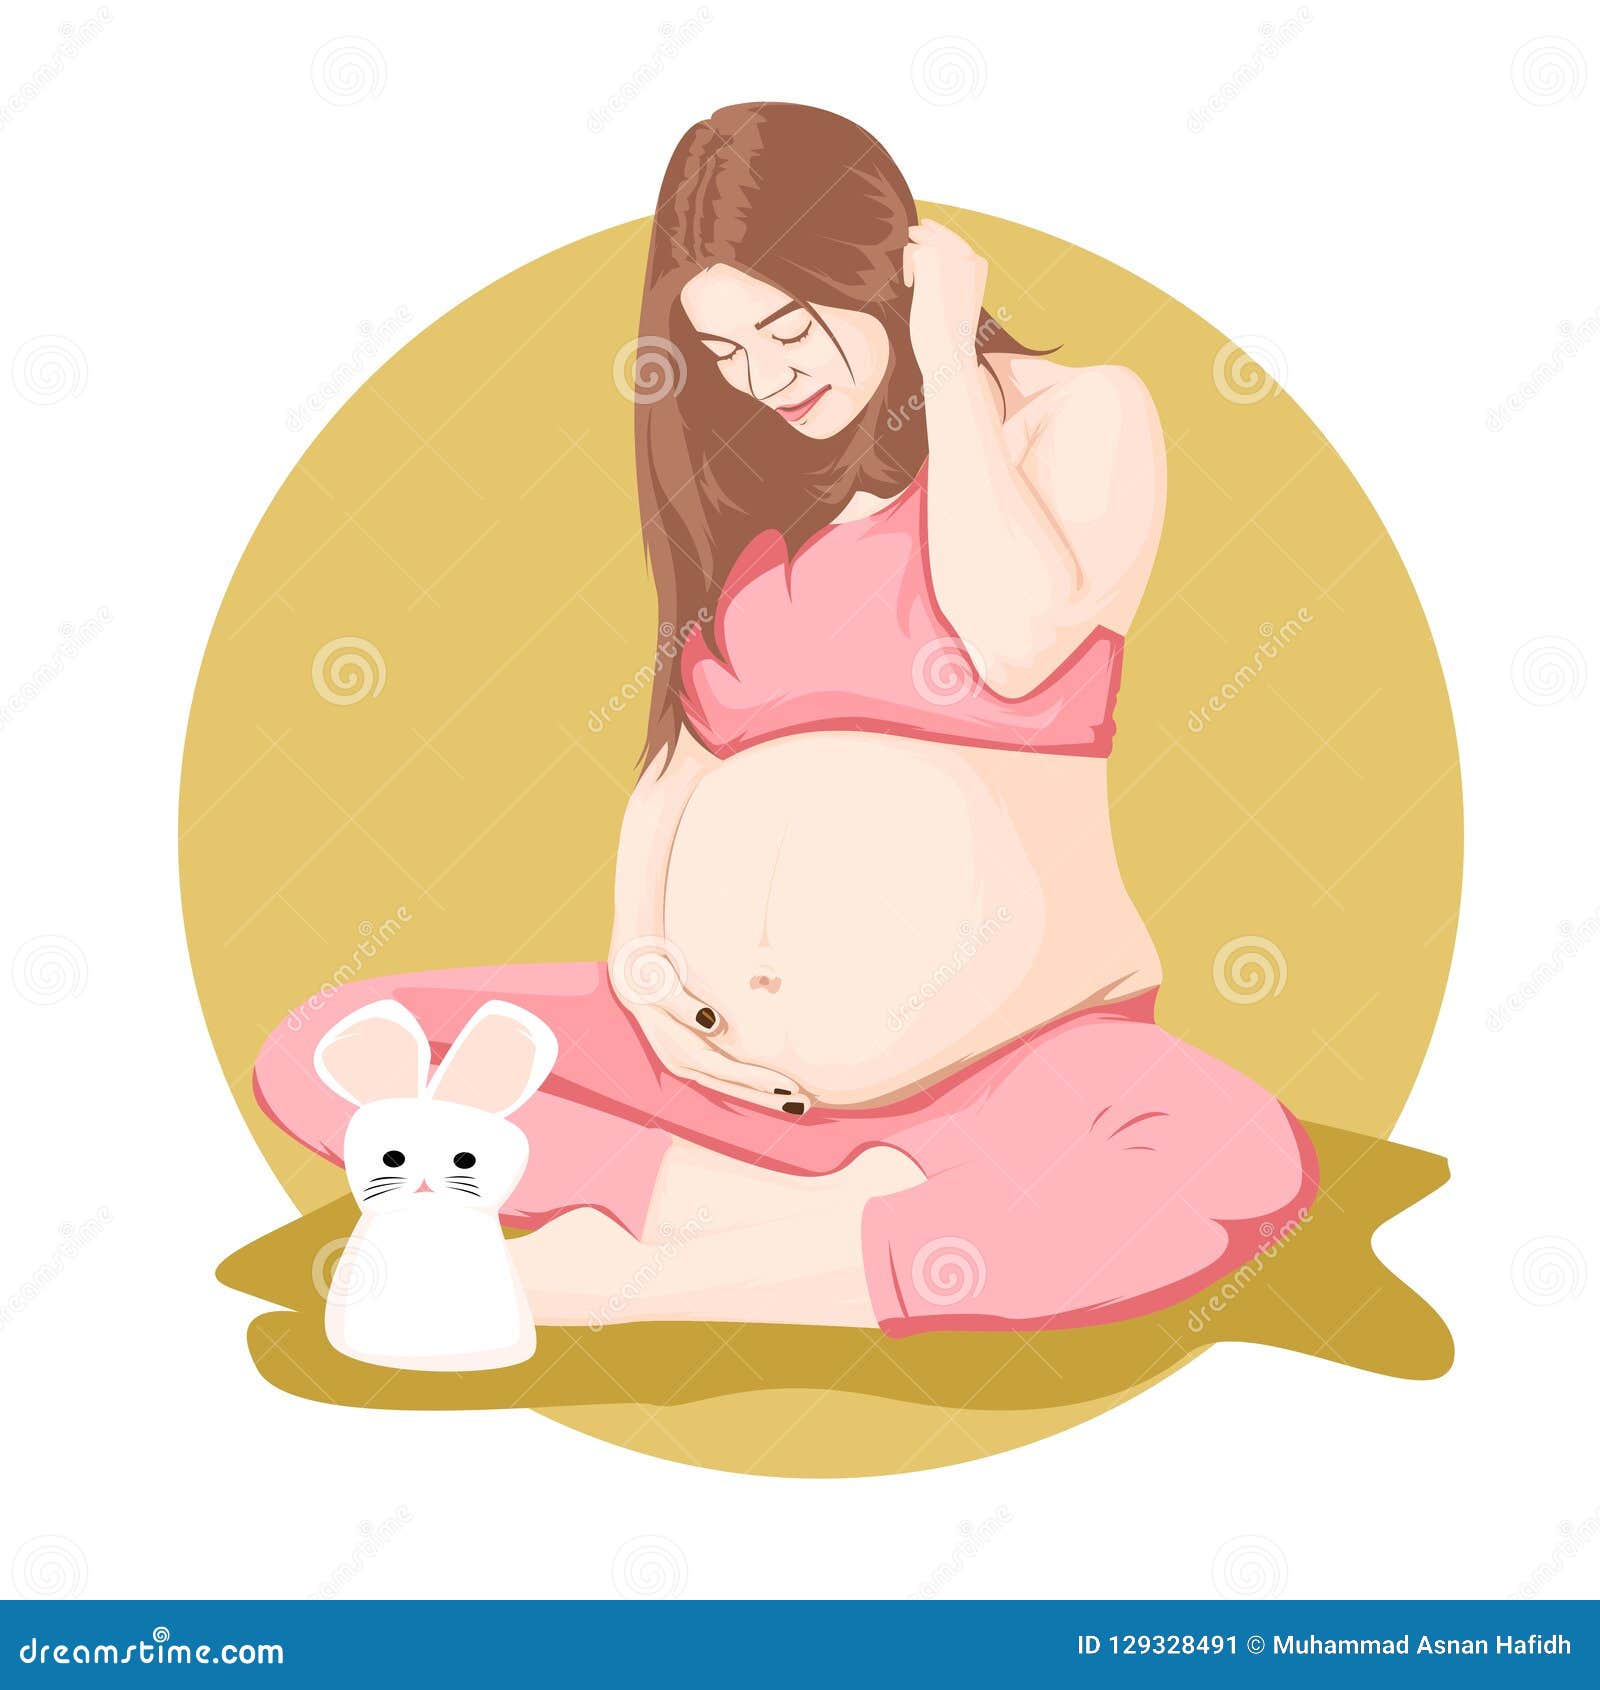 pregnant-woman-cartoon-pregnant-woman-touching-her-belly-there-rabbit-doll-concept-maternal-health-care-vector-cartoon-129328491.jpg